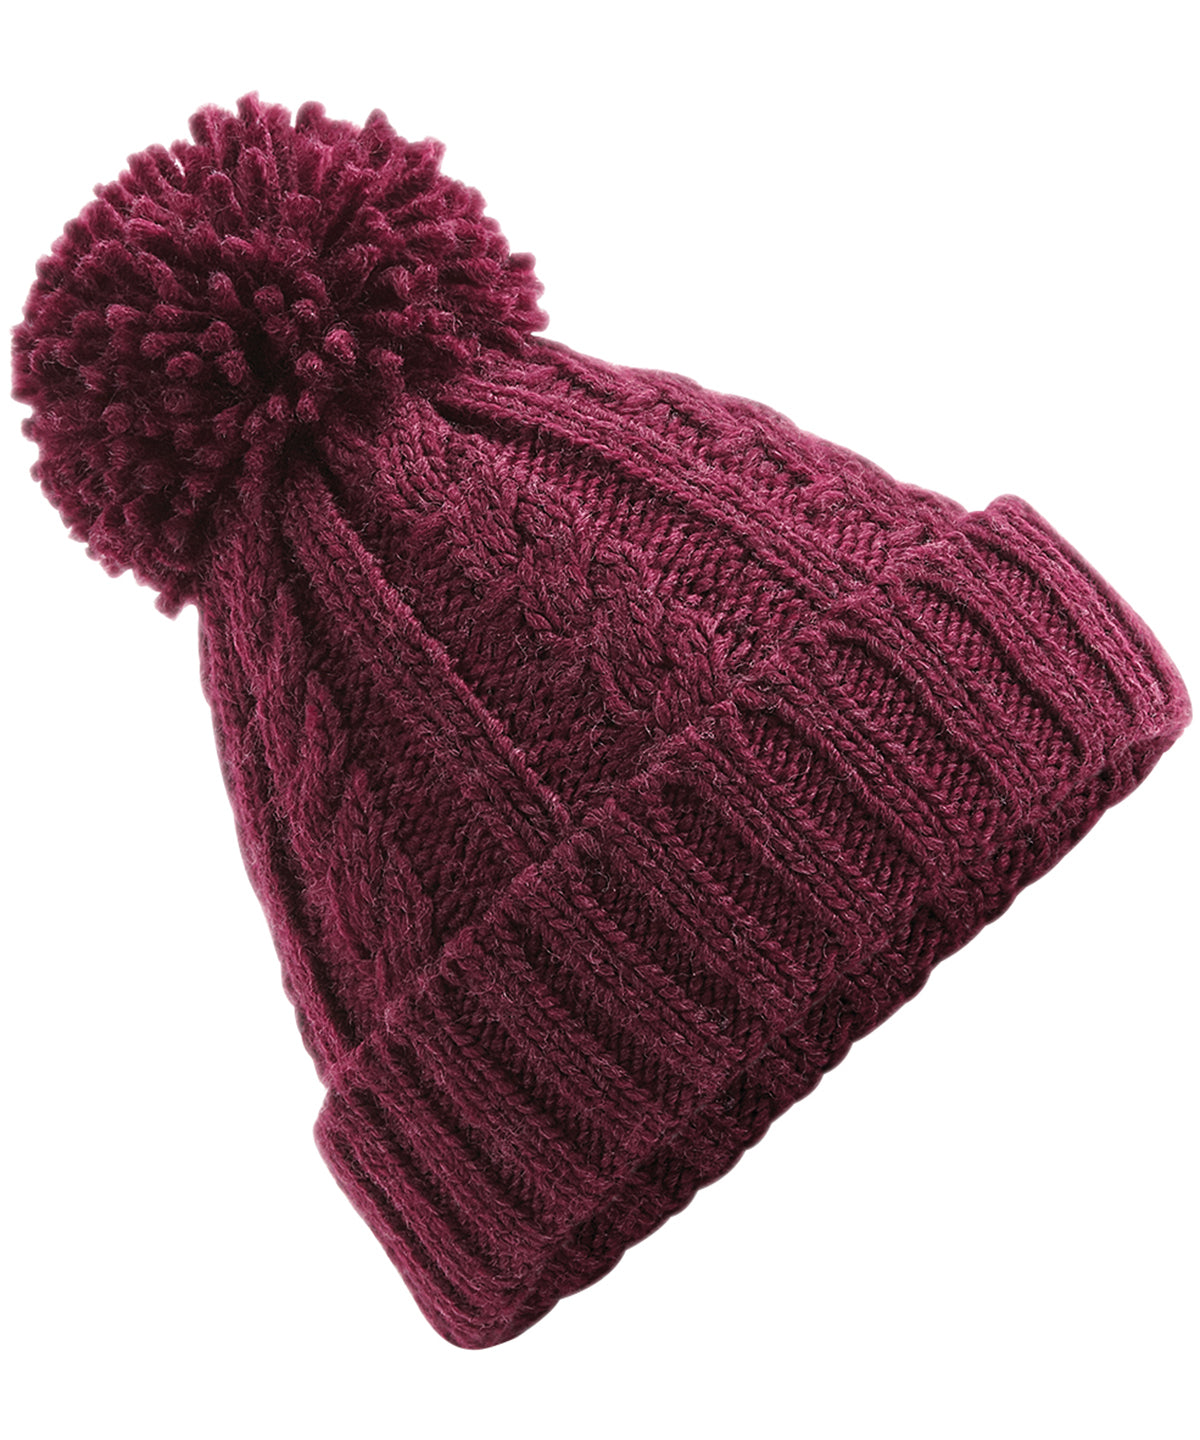 Personalised Hats - Burgundy Beechfield Cable knit melange beanie